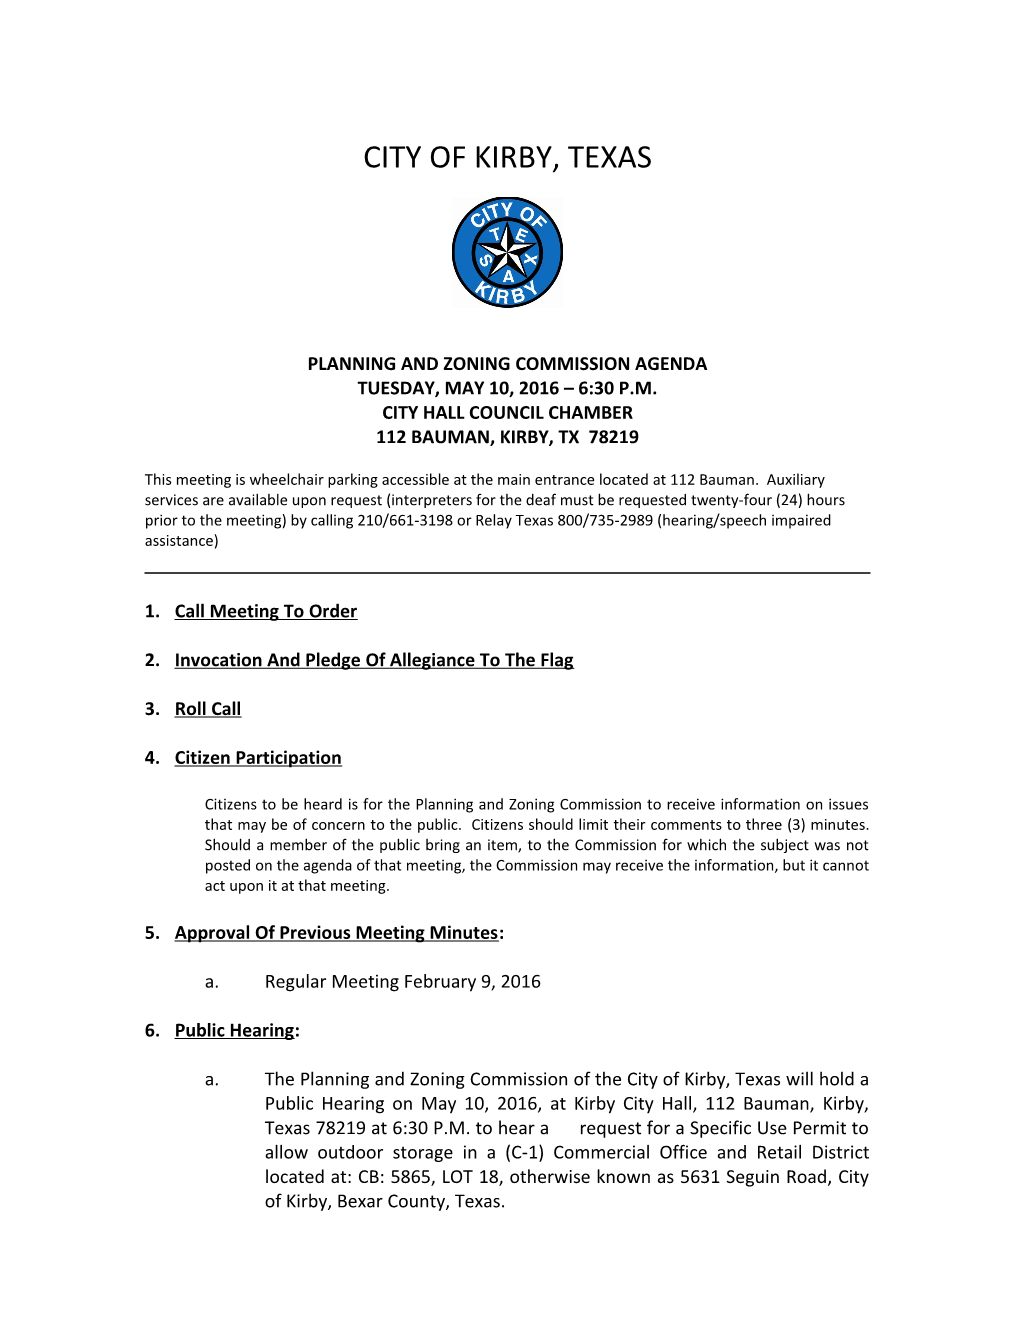 Planning and Zoning Commission Agenda